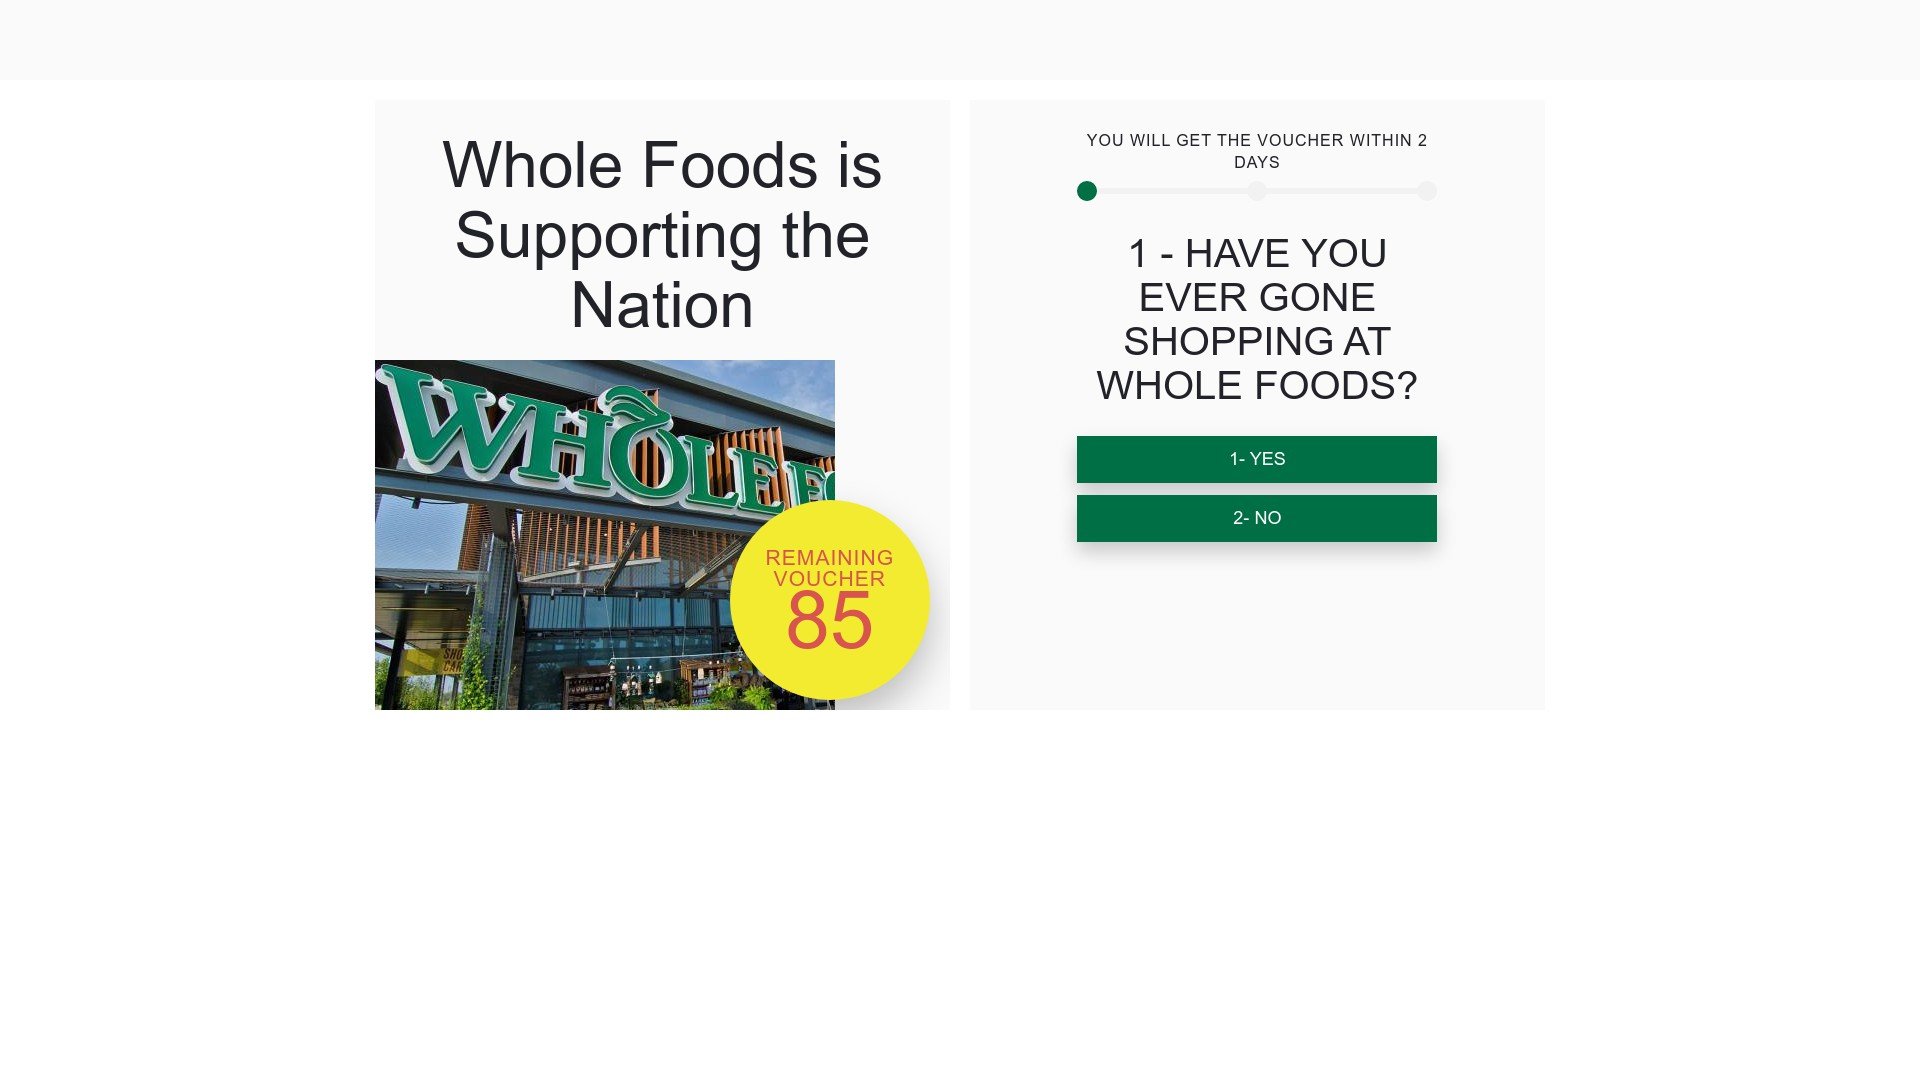 Whole Foods $175 Voucher Scam on WhatsApp